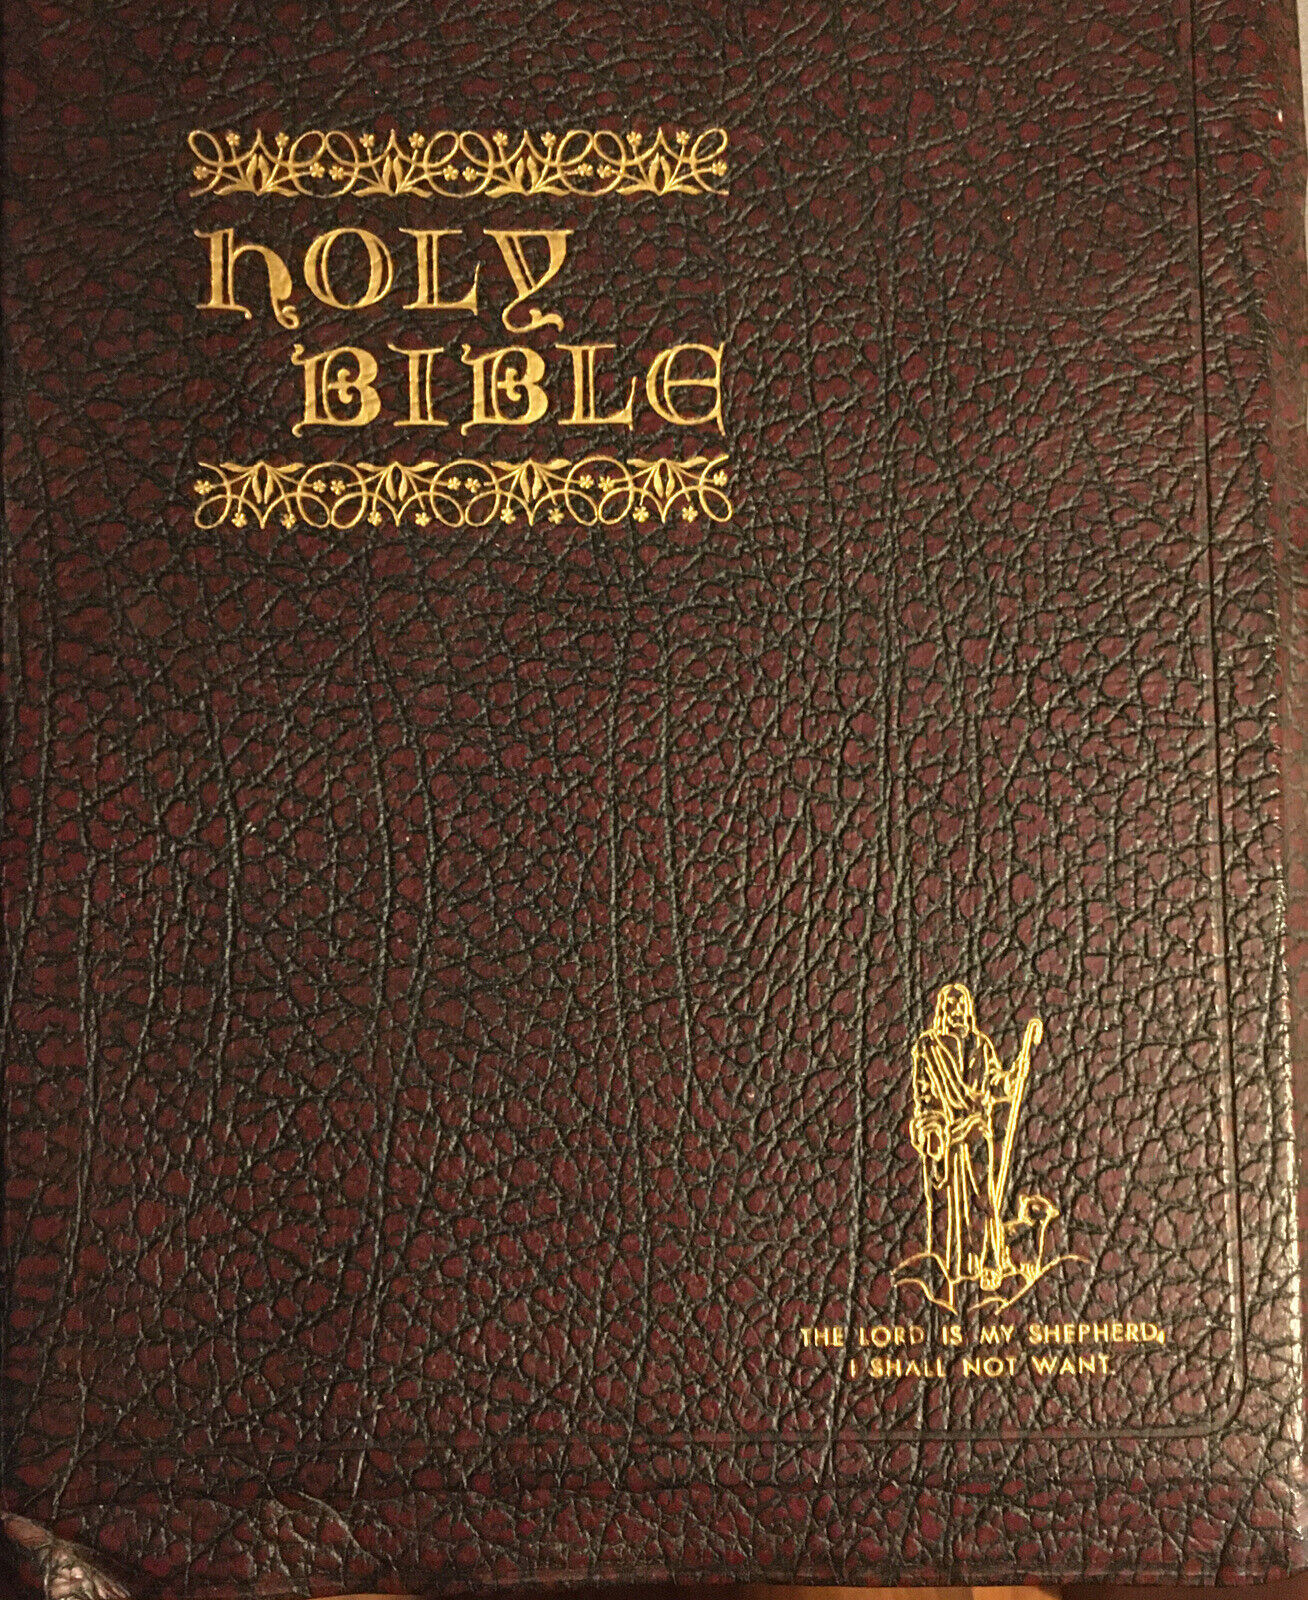 Vintage 1946 Family size Holy Bible w photos. Nice condition